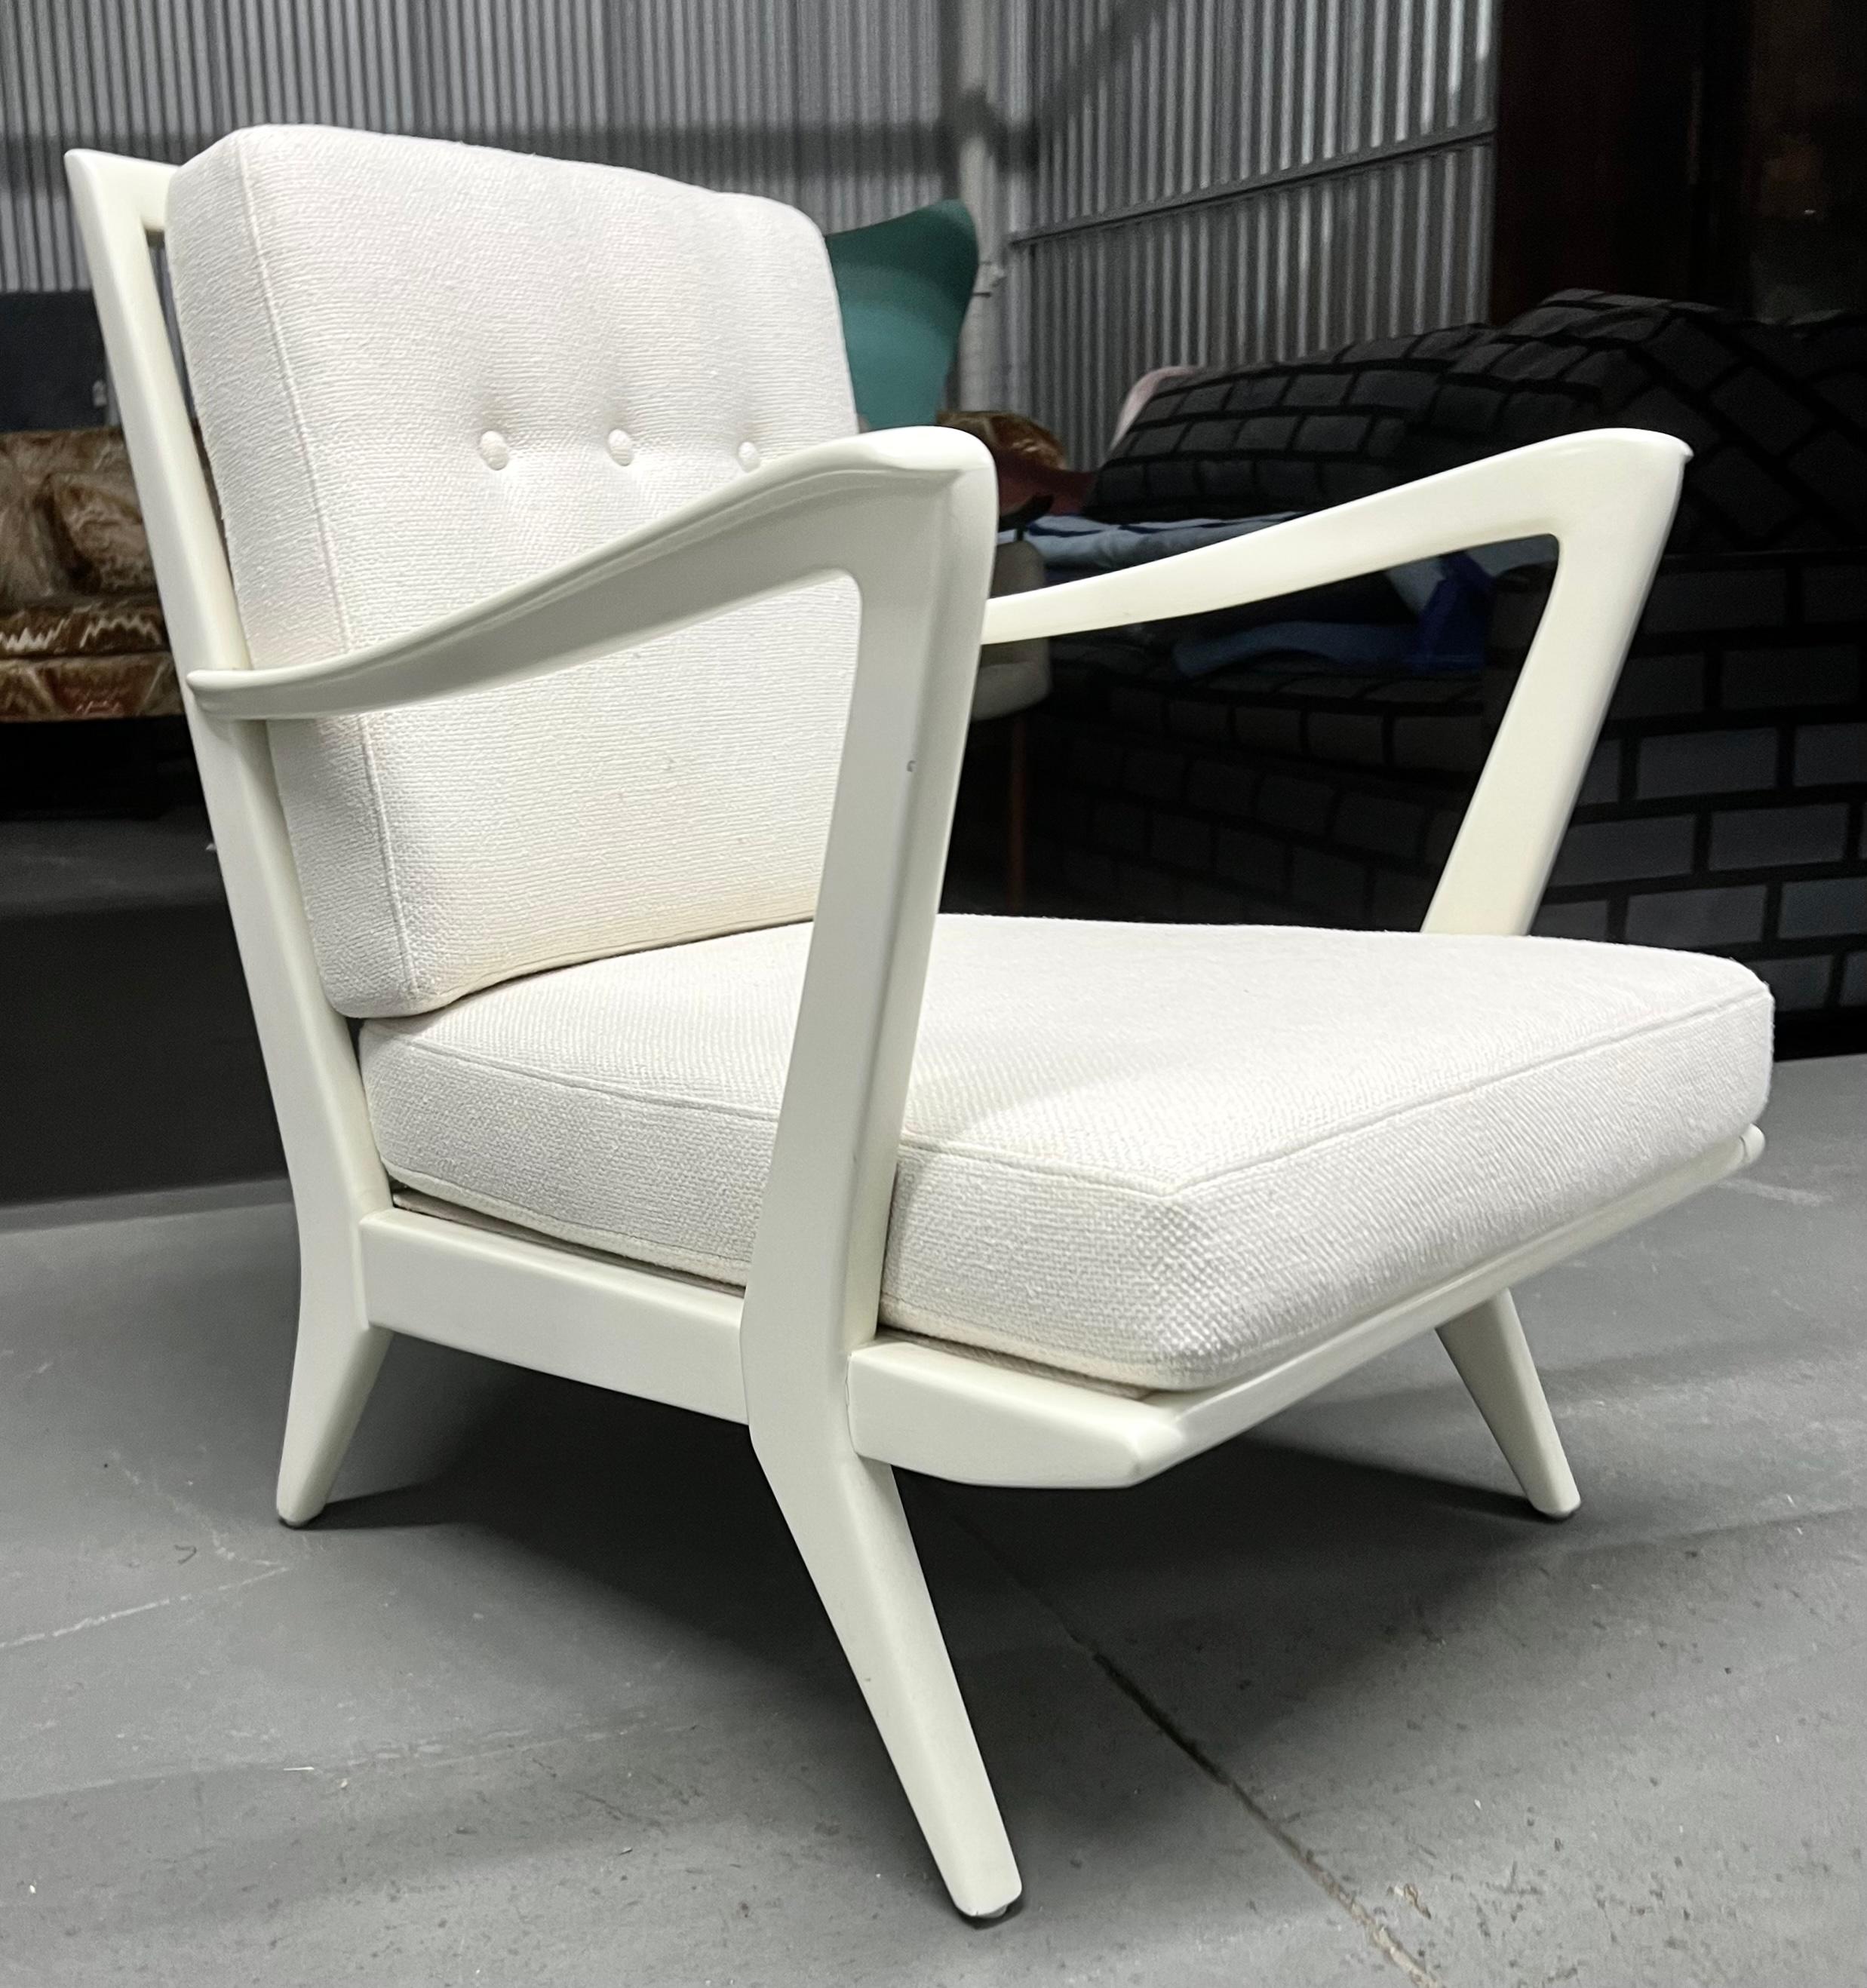 Pair of armchairs, model “516”, originally designed by Ponti for the furnishing of Tranatlantico Conte Biancamano, Manufactured by Figli di Amadeo Cassina (Cassina), Italy, c. 1950
pierced slat back, off-white cream painted walnut, white woven